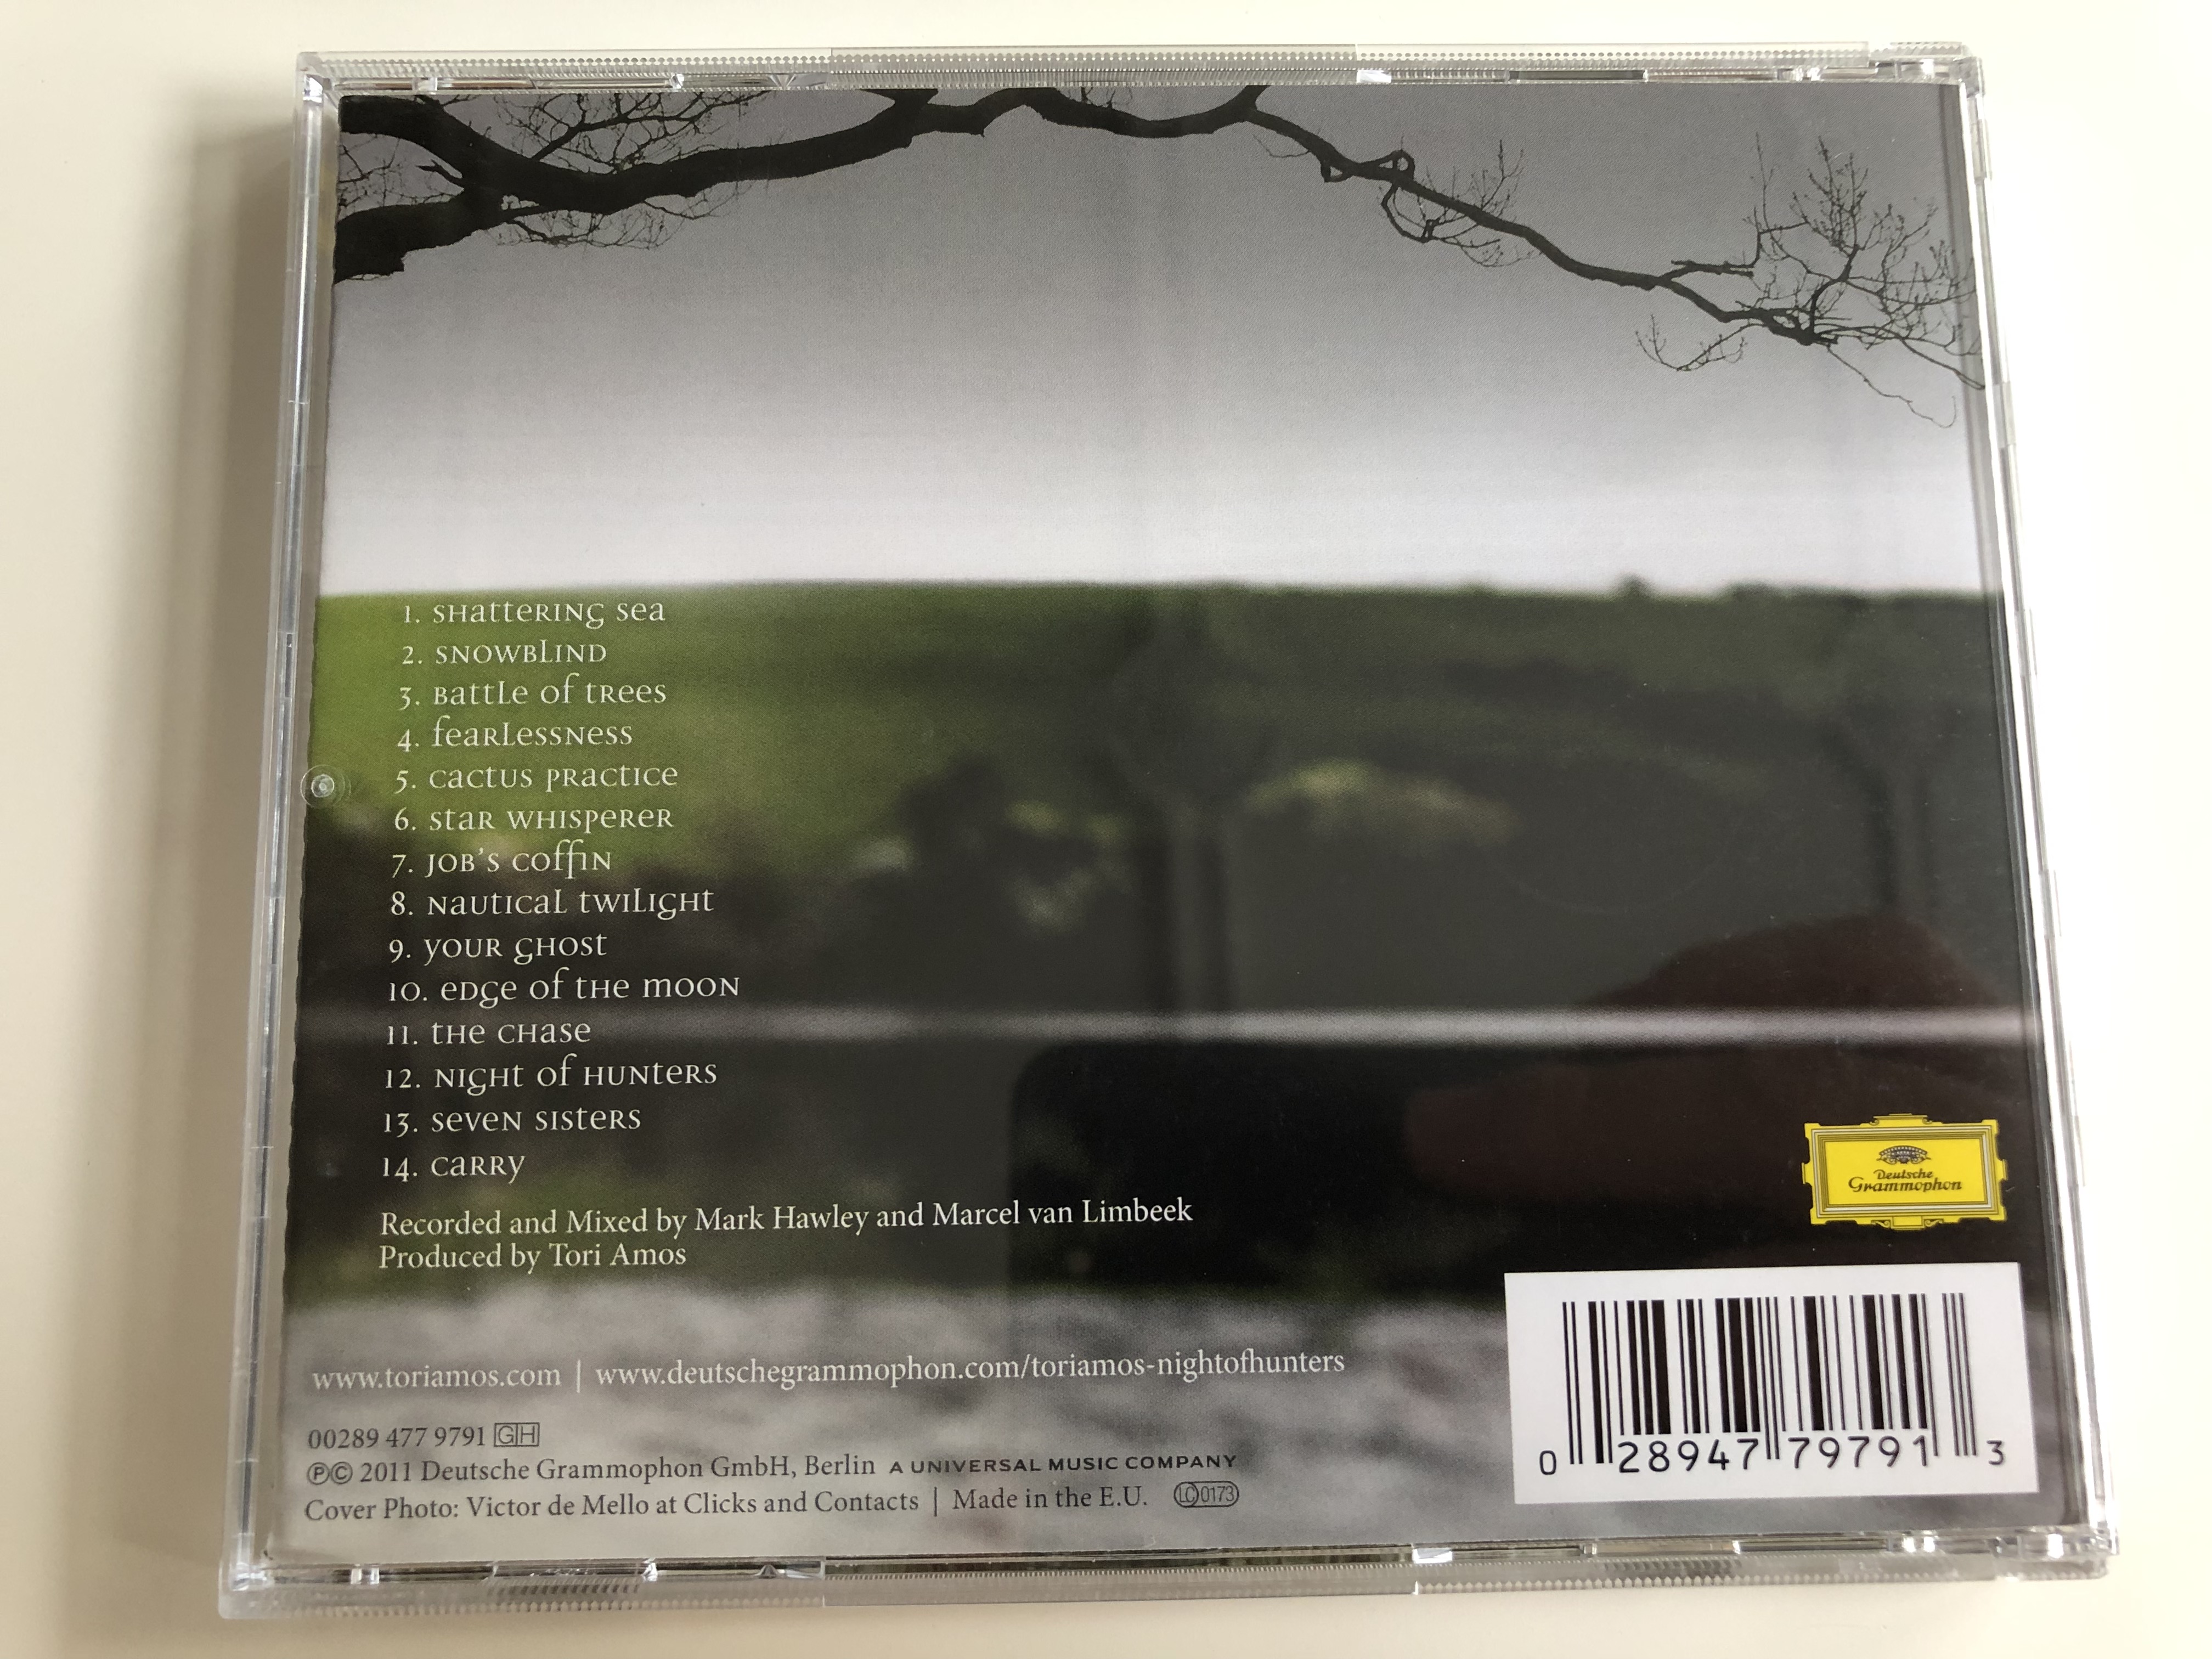 tori-amos-night-of-hunters-snowblind-fearlessness-job-s-coffin-the-chase-seven-sisters-audio-cd-2011-3-.jpg